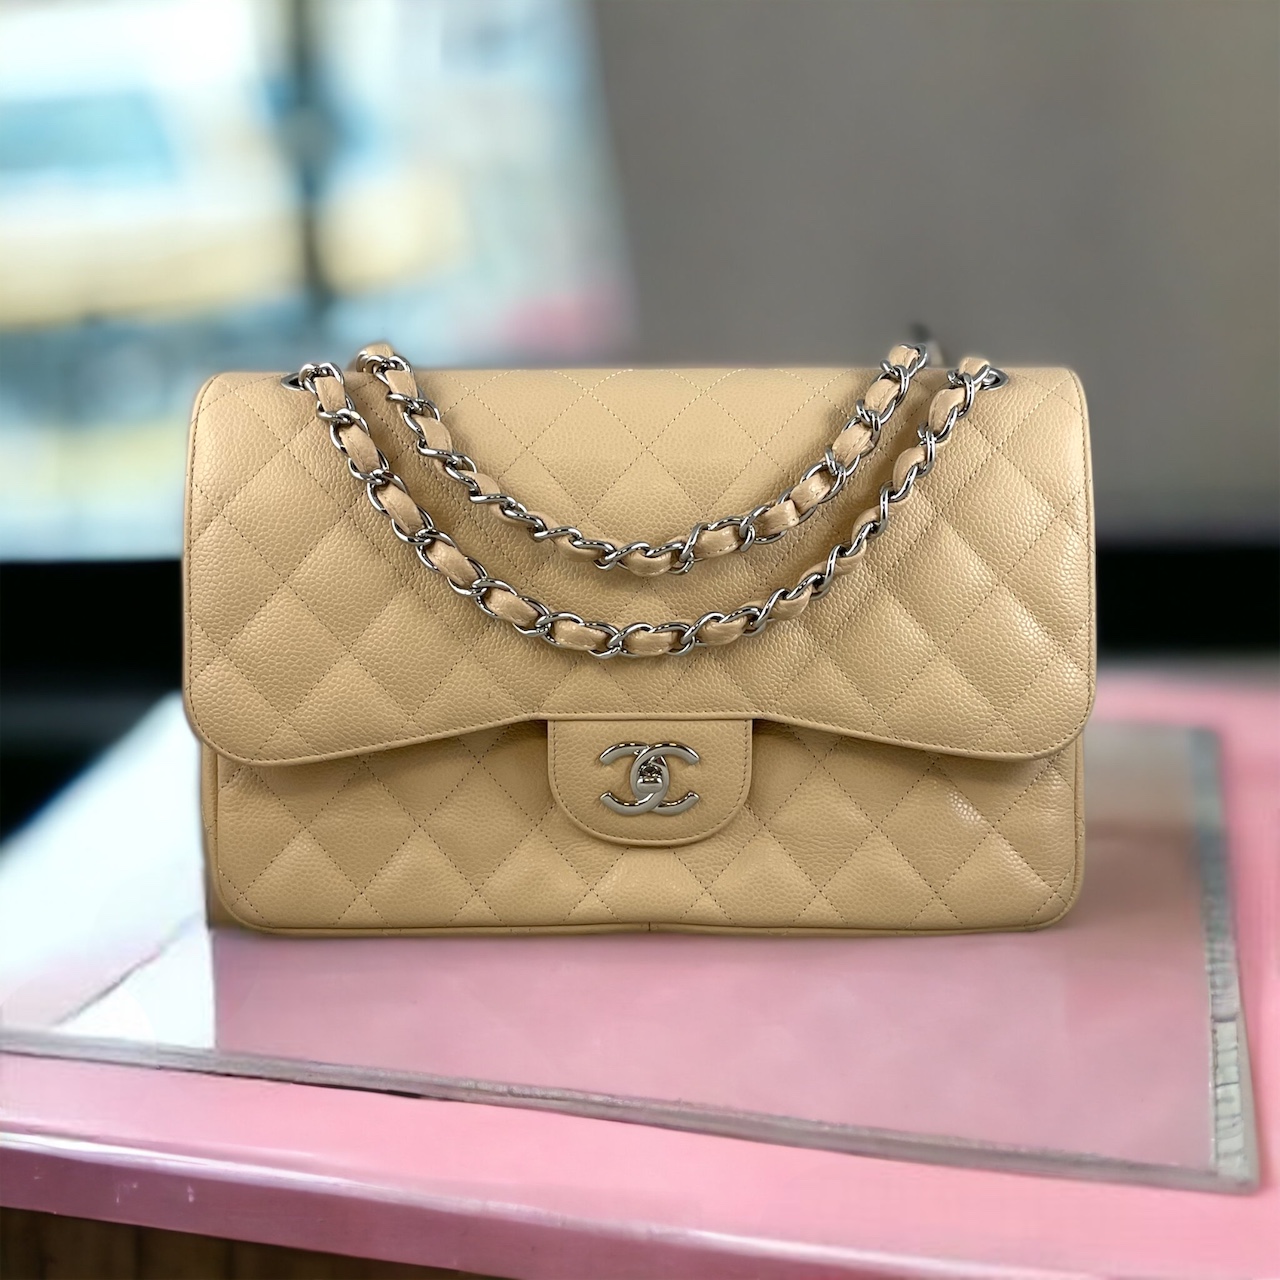 Chanel Caviar Double Flap Bag in Beige Clair